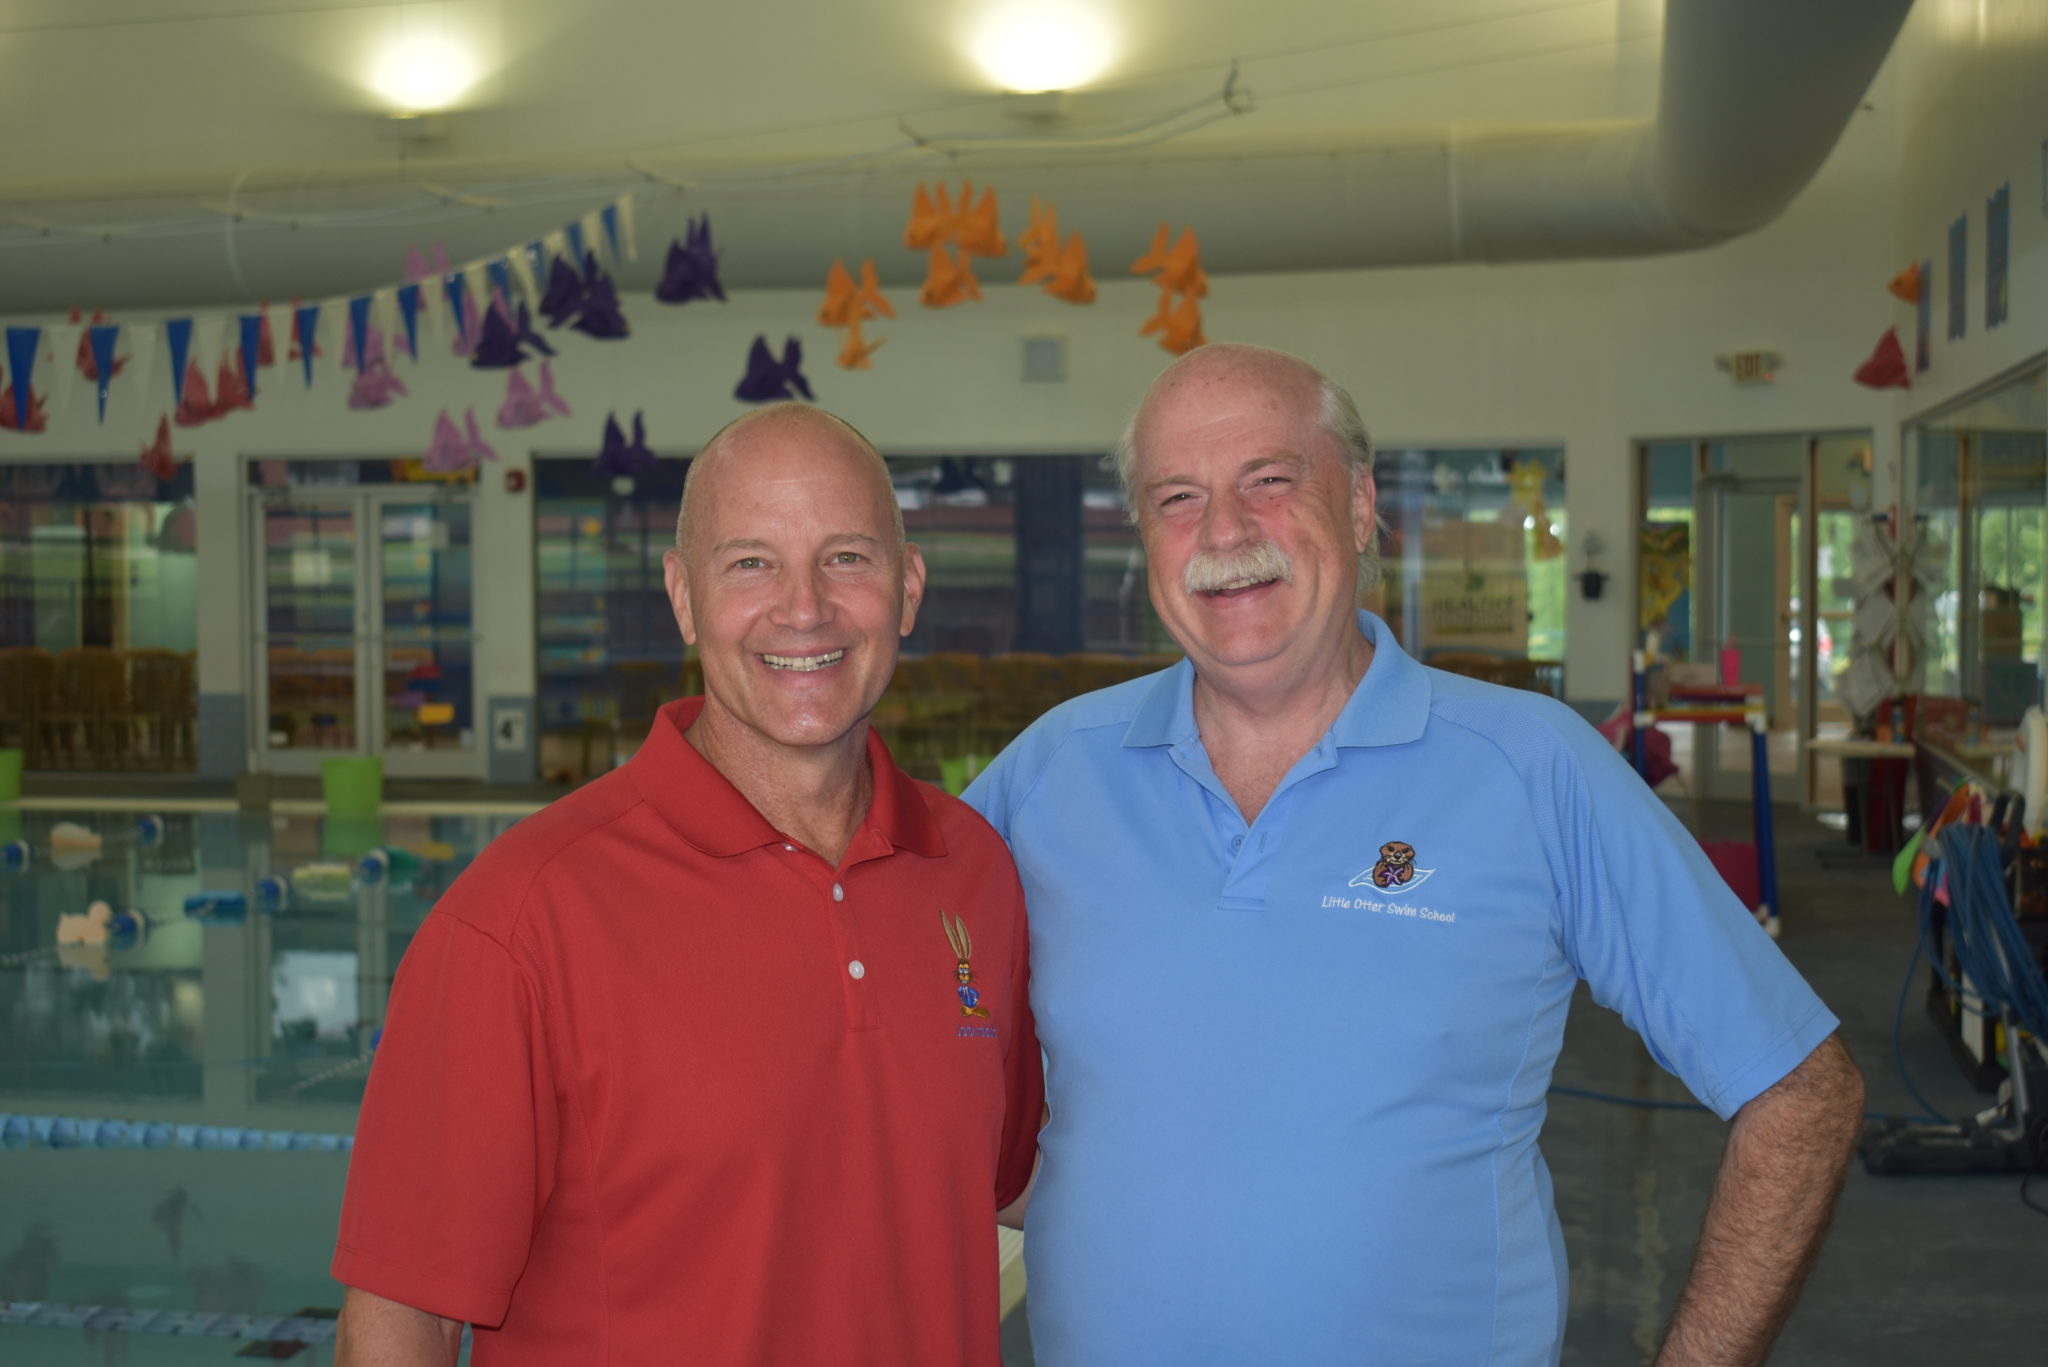 Owners of Jackrabbit Technologies and Little Otter Swim School Discuss Inc. 5000 Recognition.